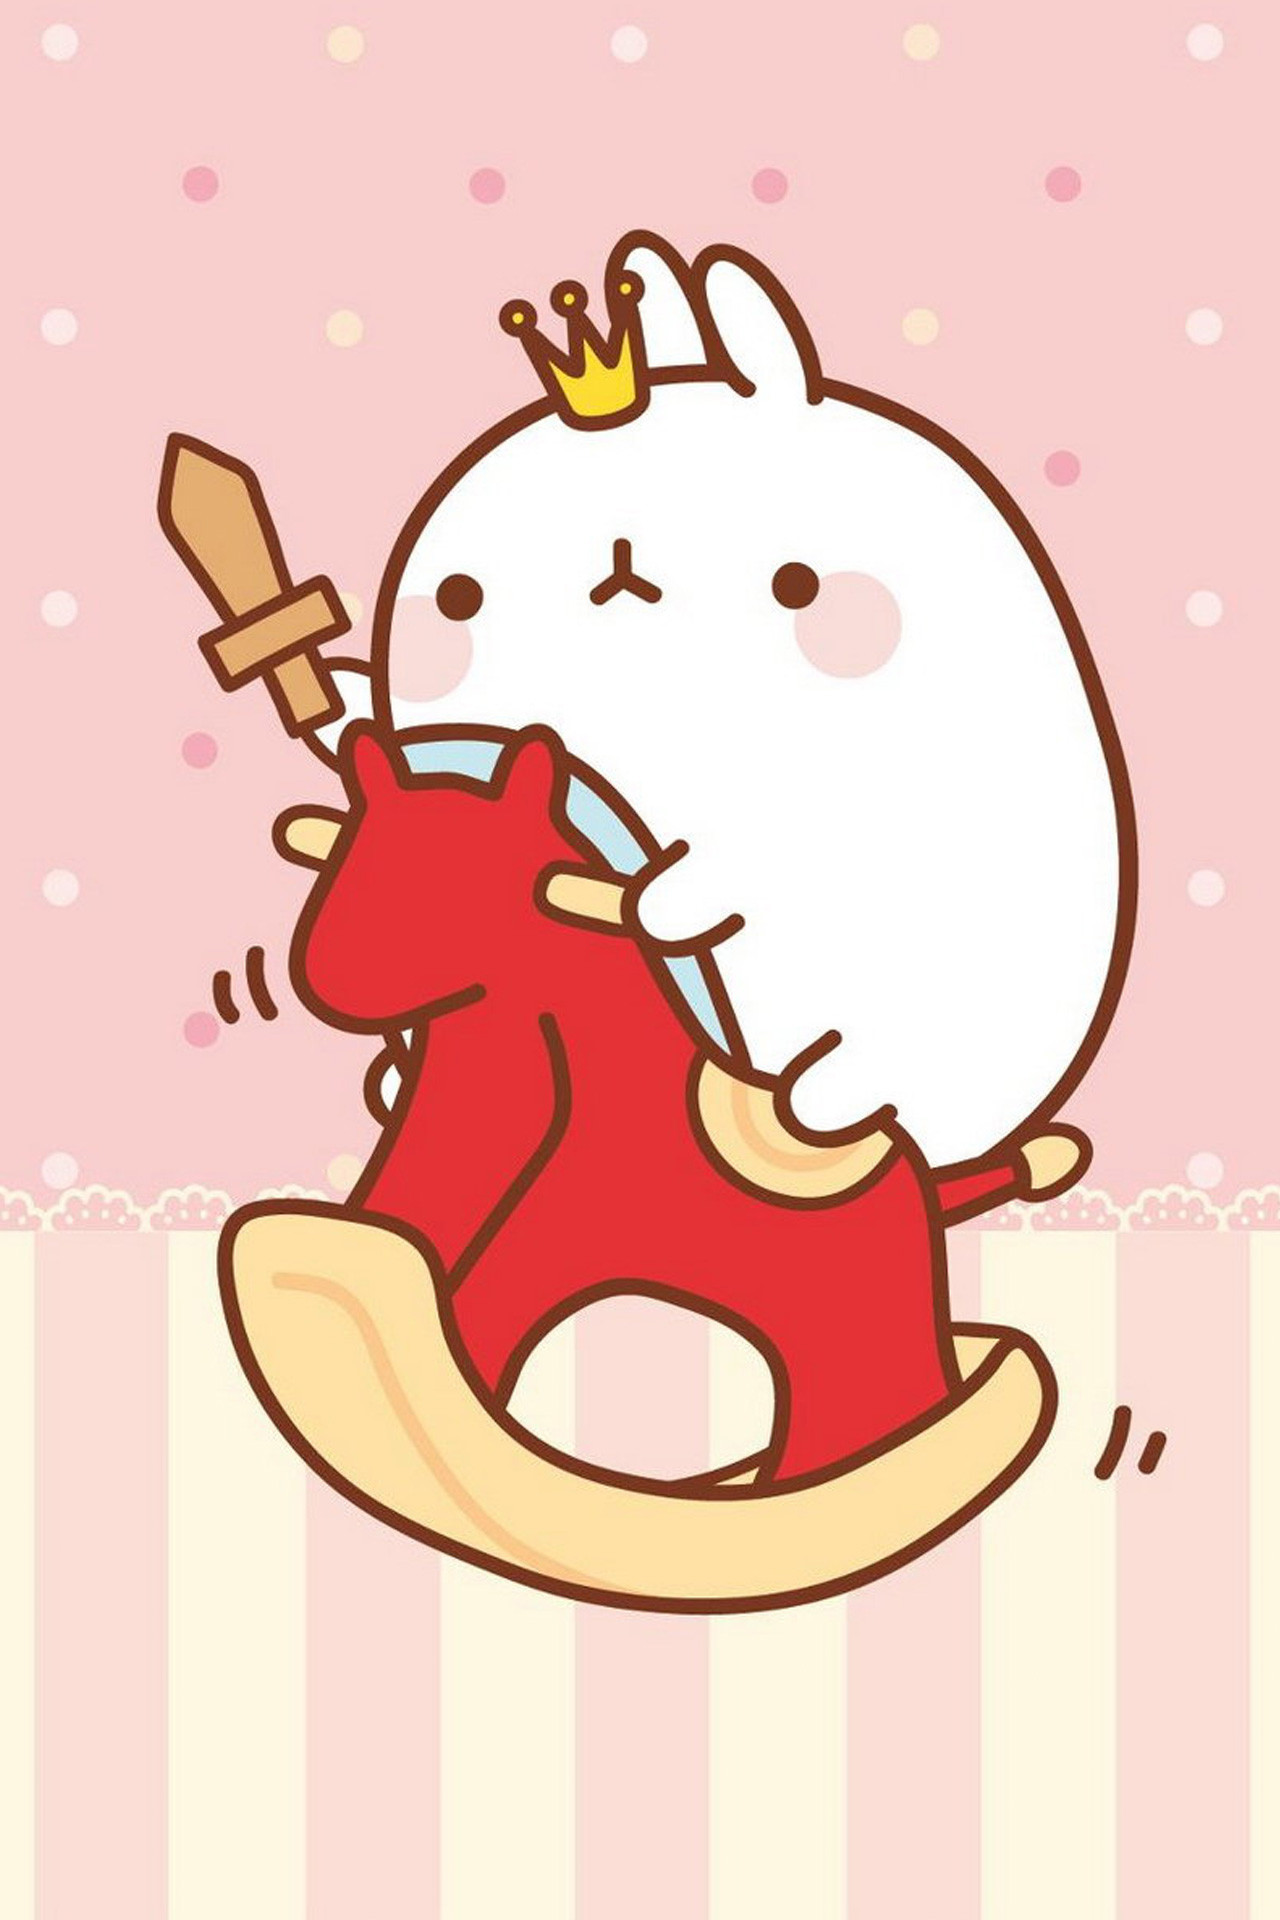 1280x1920 Lollimobile - Molang Wallpapers Buy Now Make it a unicorn!